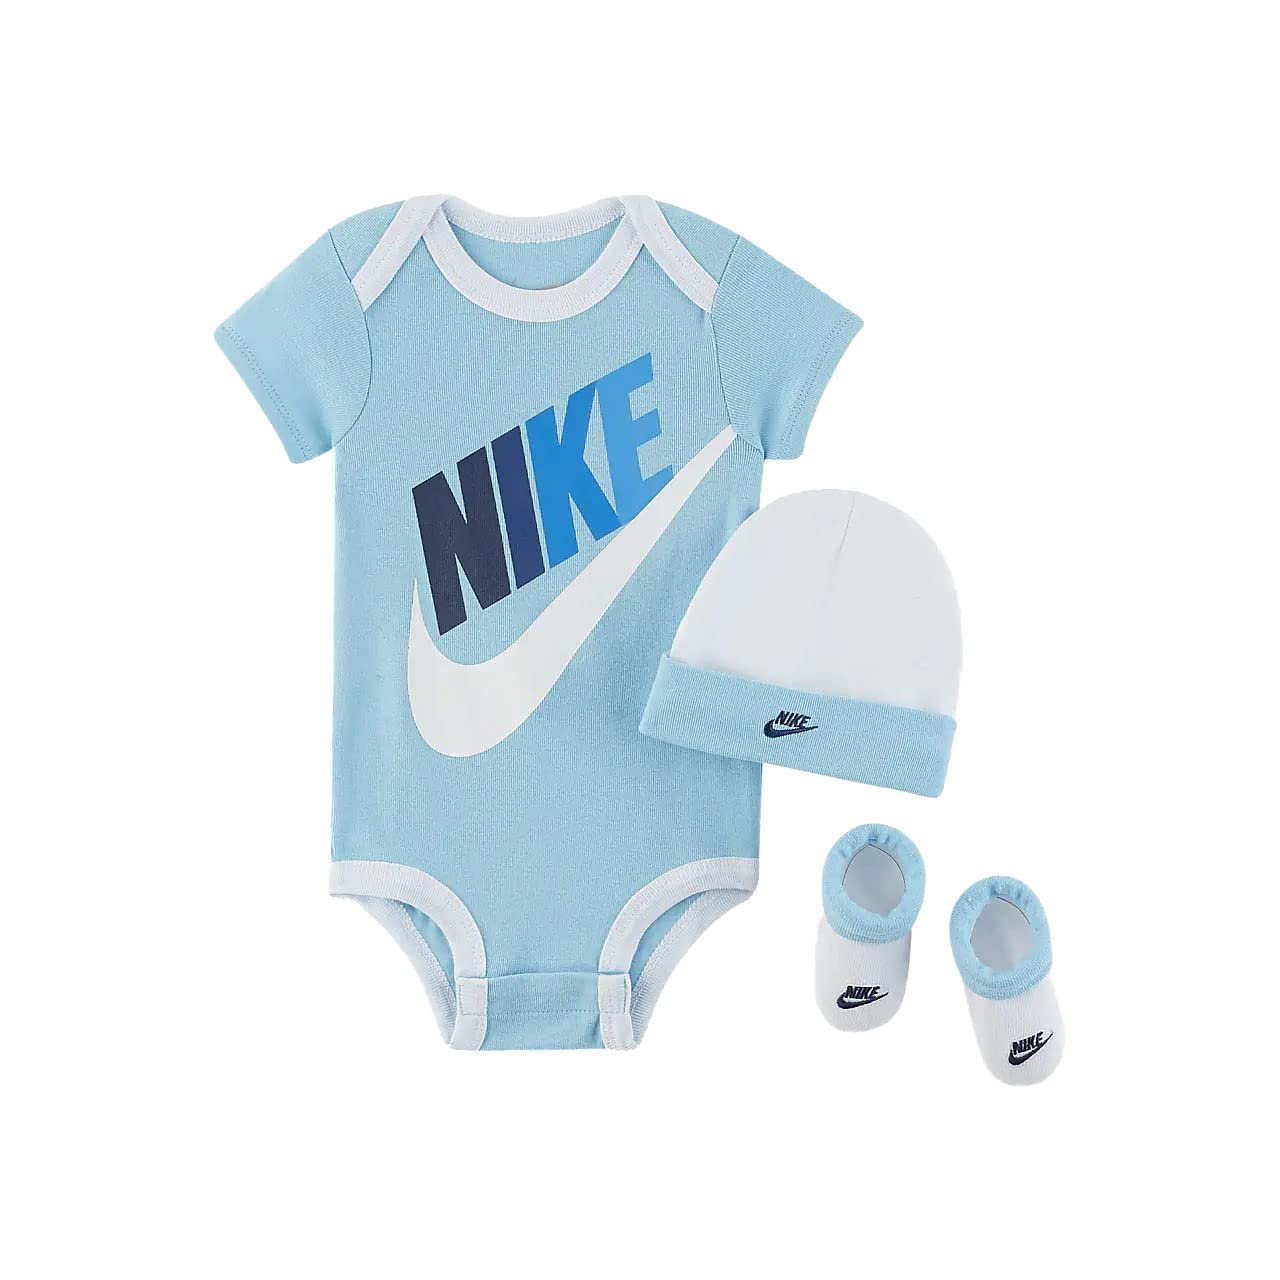 [MN0313-C3L] Baby Nike Bodysuit, Hat and Booties 3-PC Box Set